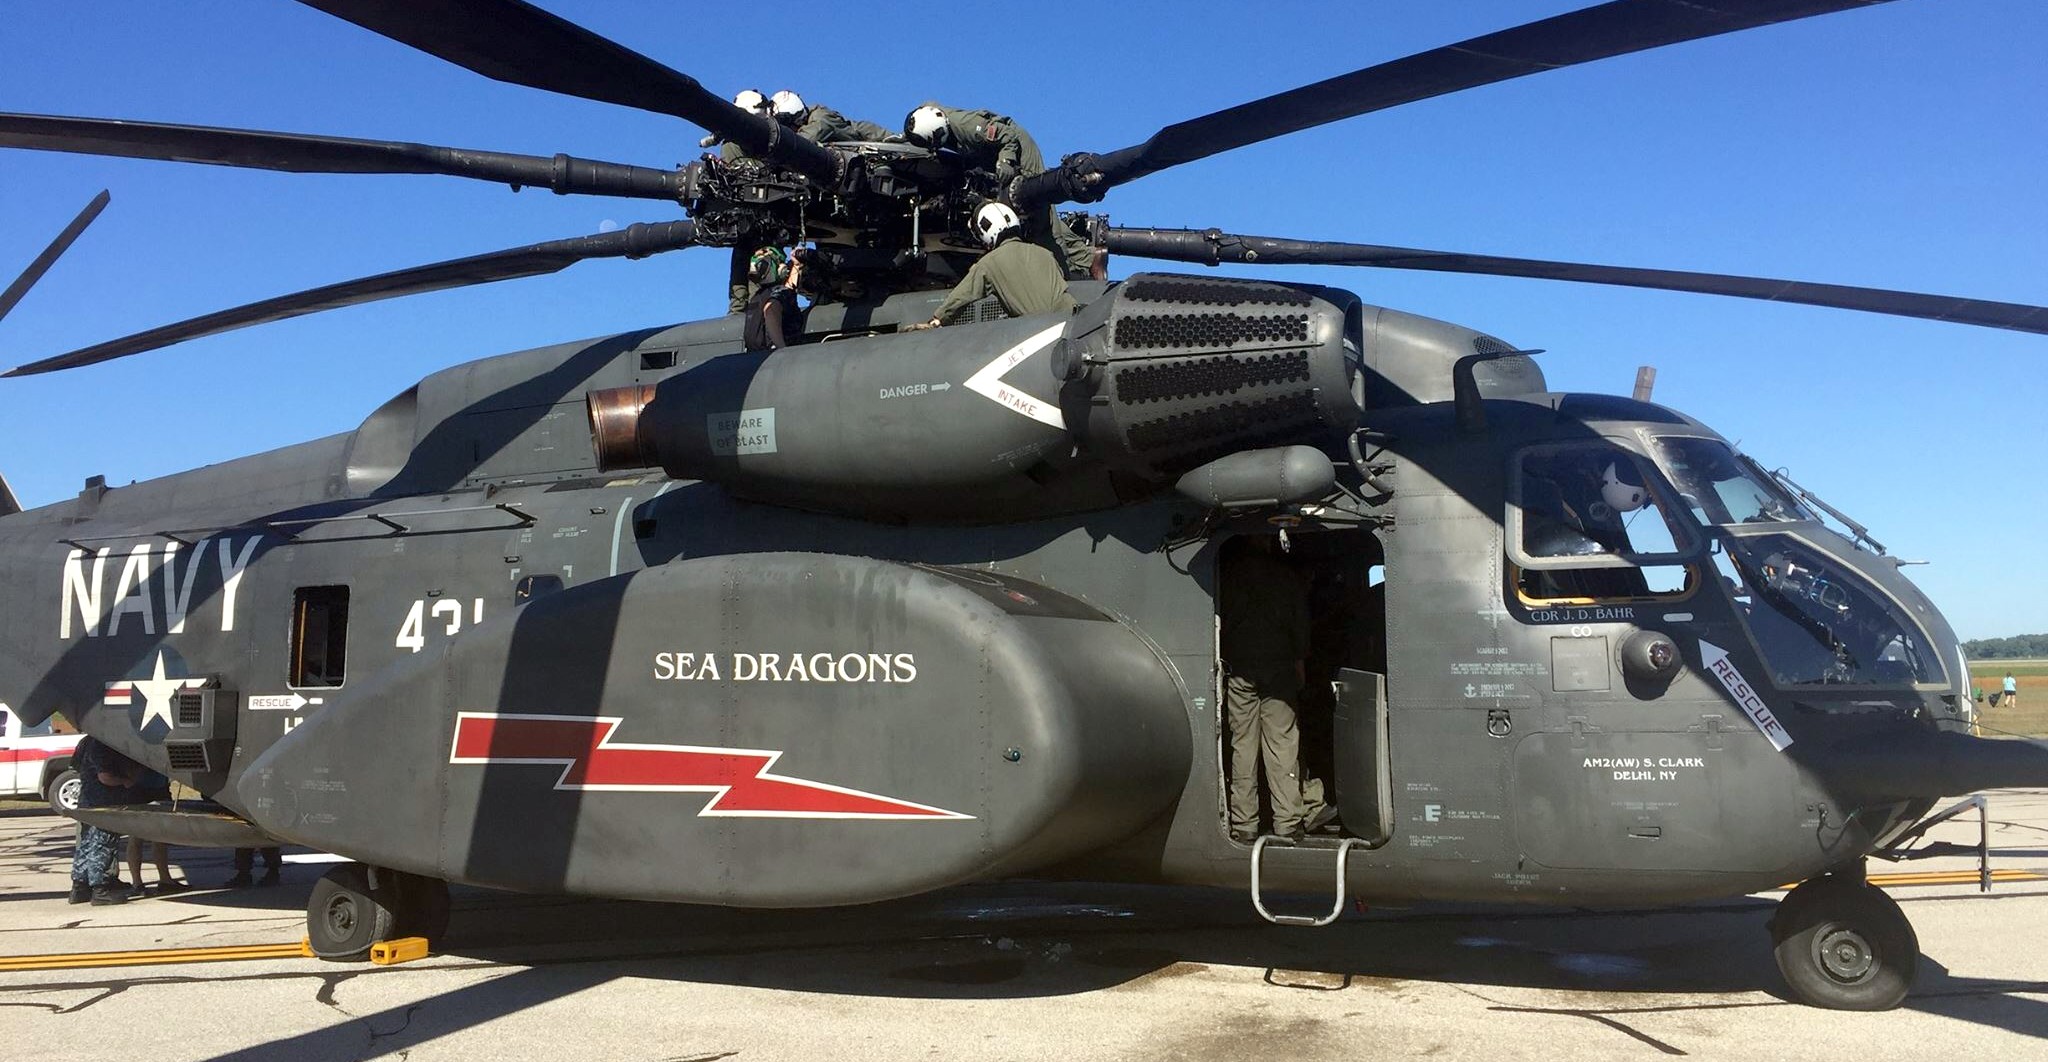 hm-12 sea dragons helicopter mine countermeasures squadron navy mh-53d sea dragon 09